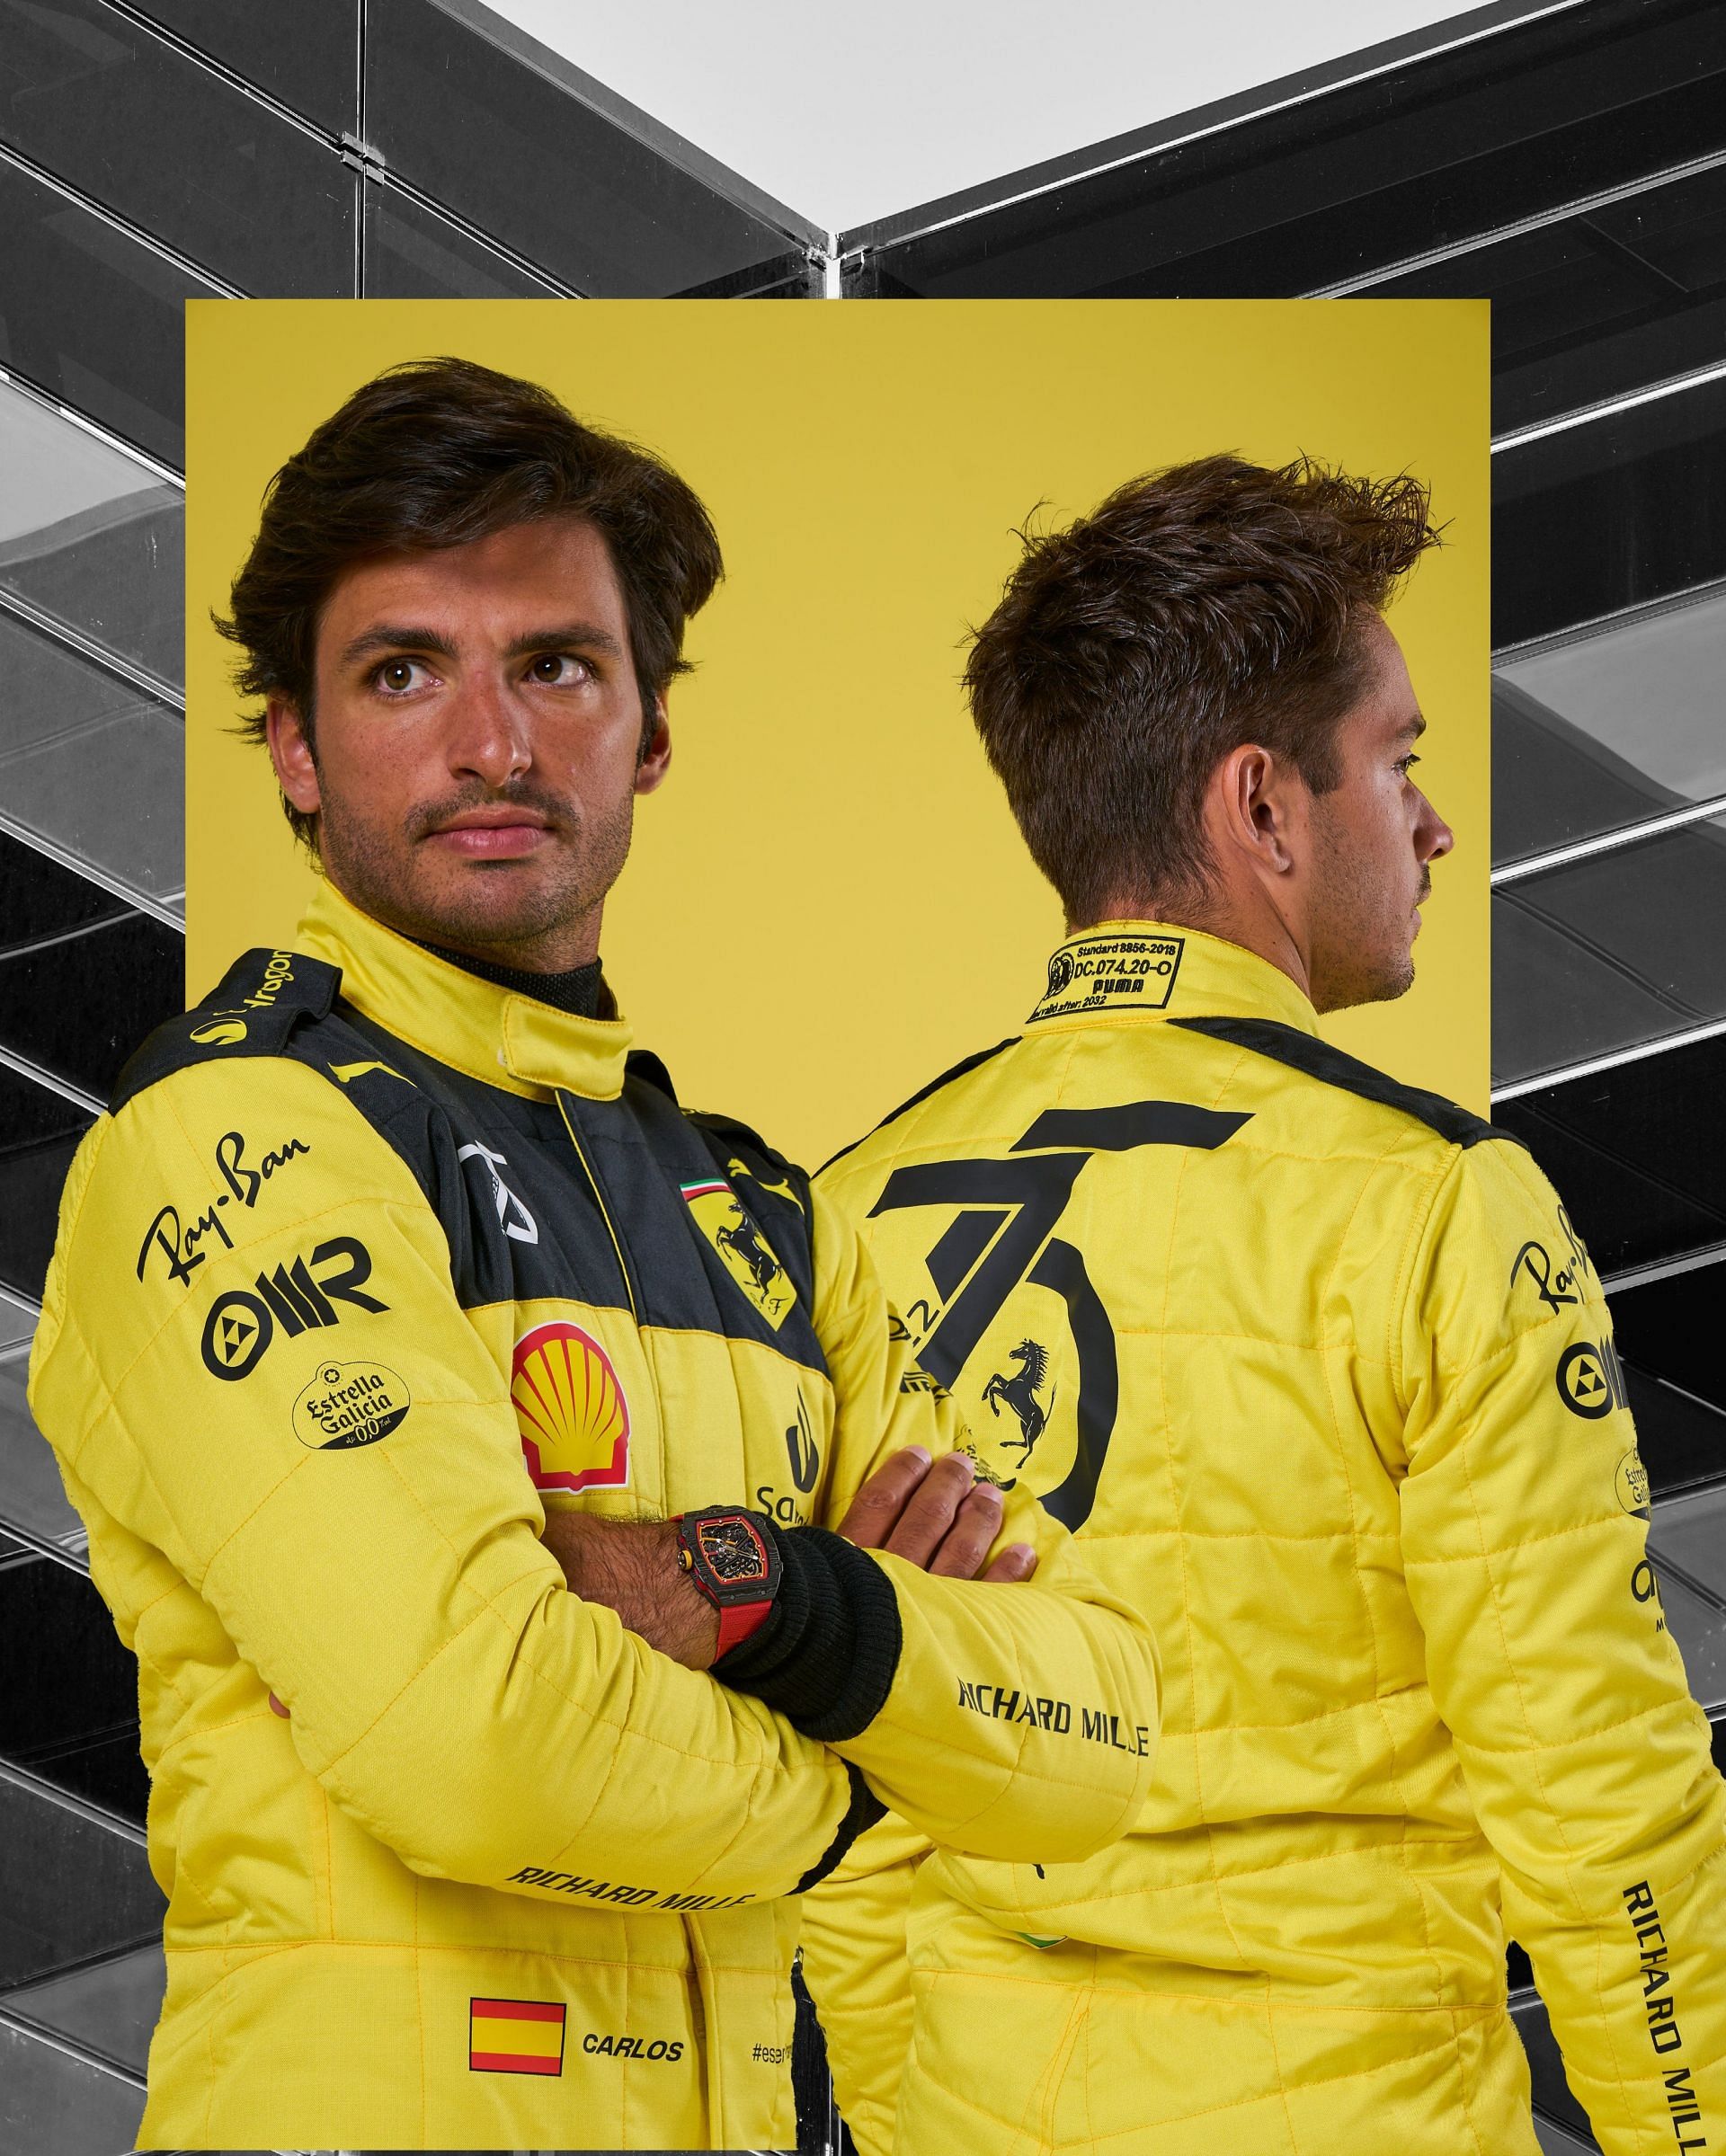 Carlos Sainz(left) and Charles Leclerc(right) in special yellow liveries for Italian GP.(Credits Scuderia Ferrari/Twitter)